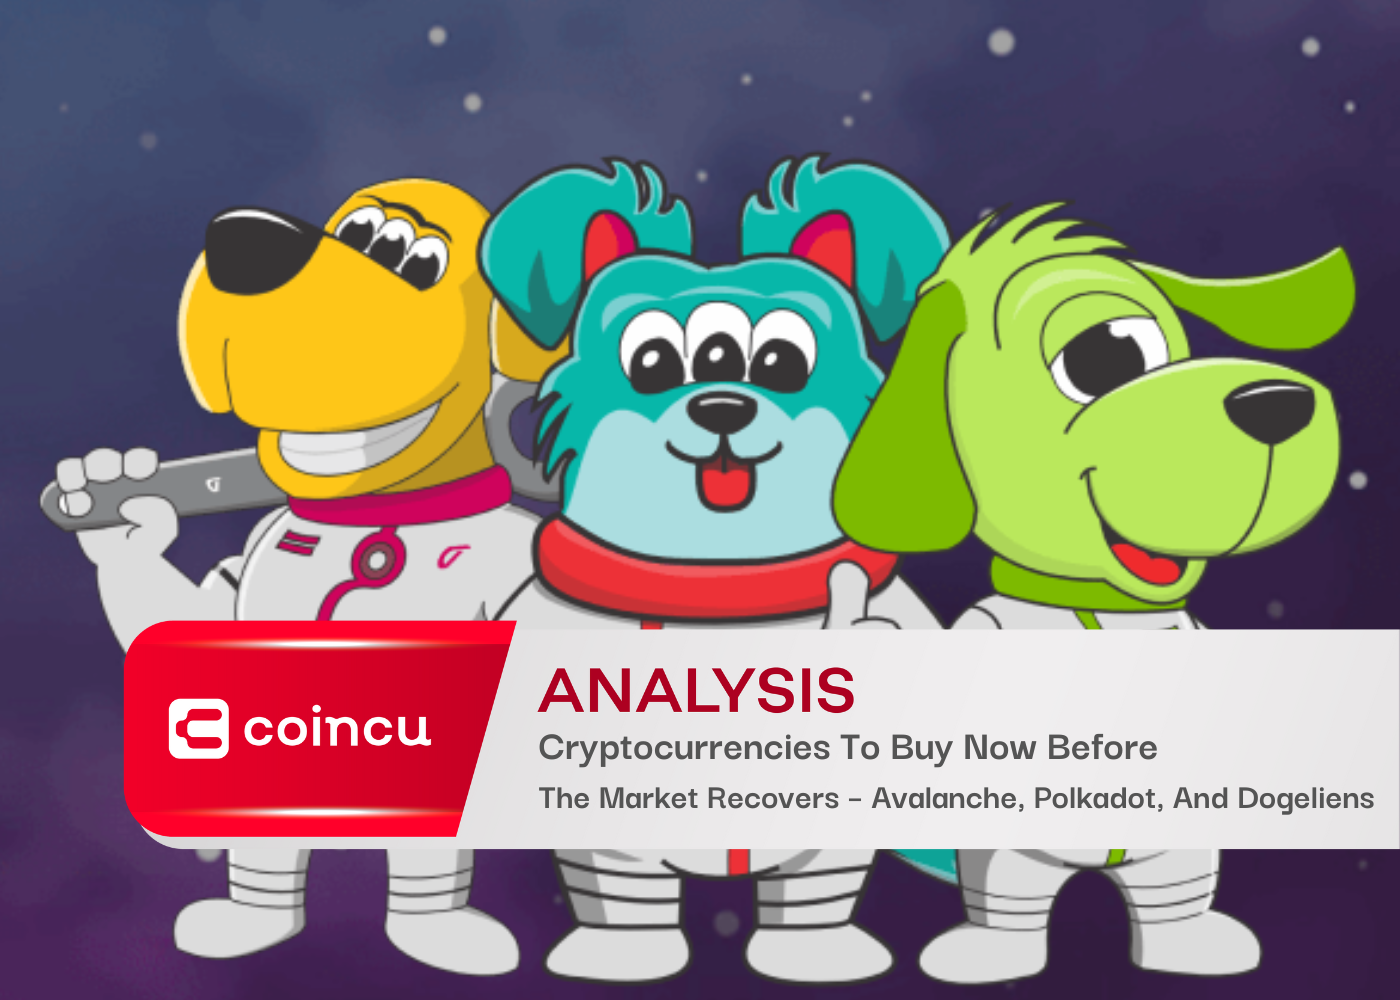 Cryptocurrencies To Buy Now Before The Market Recovers – Avalanche, Polkadot, And Dogeliens